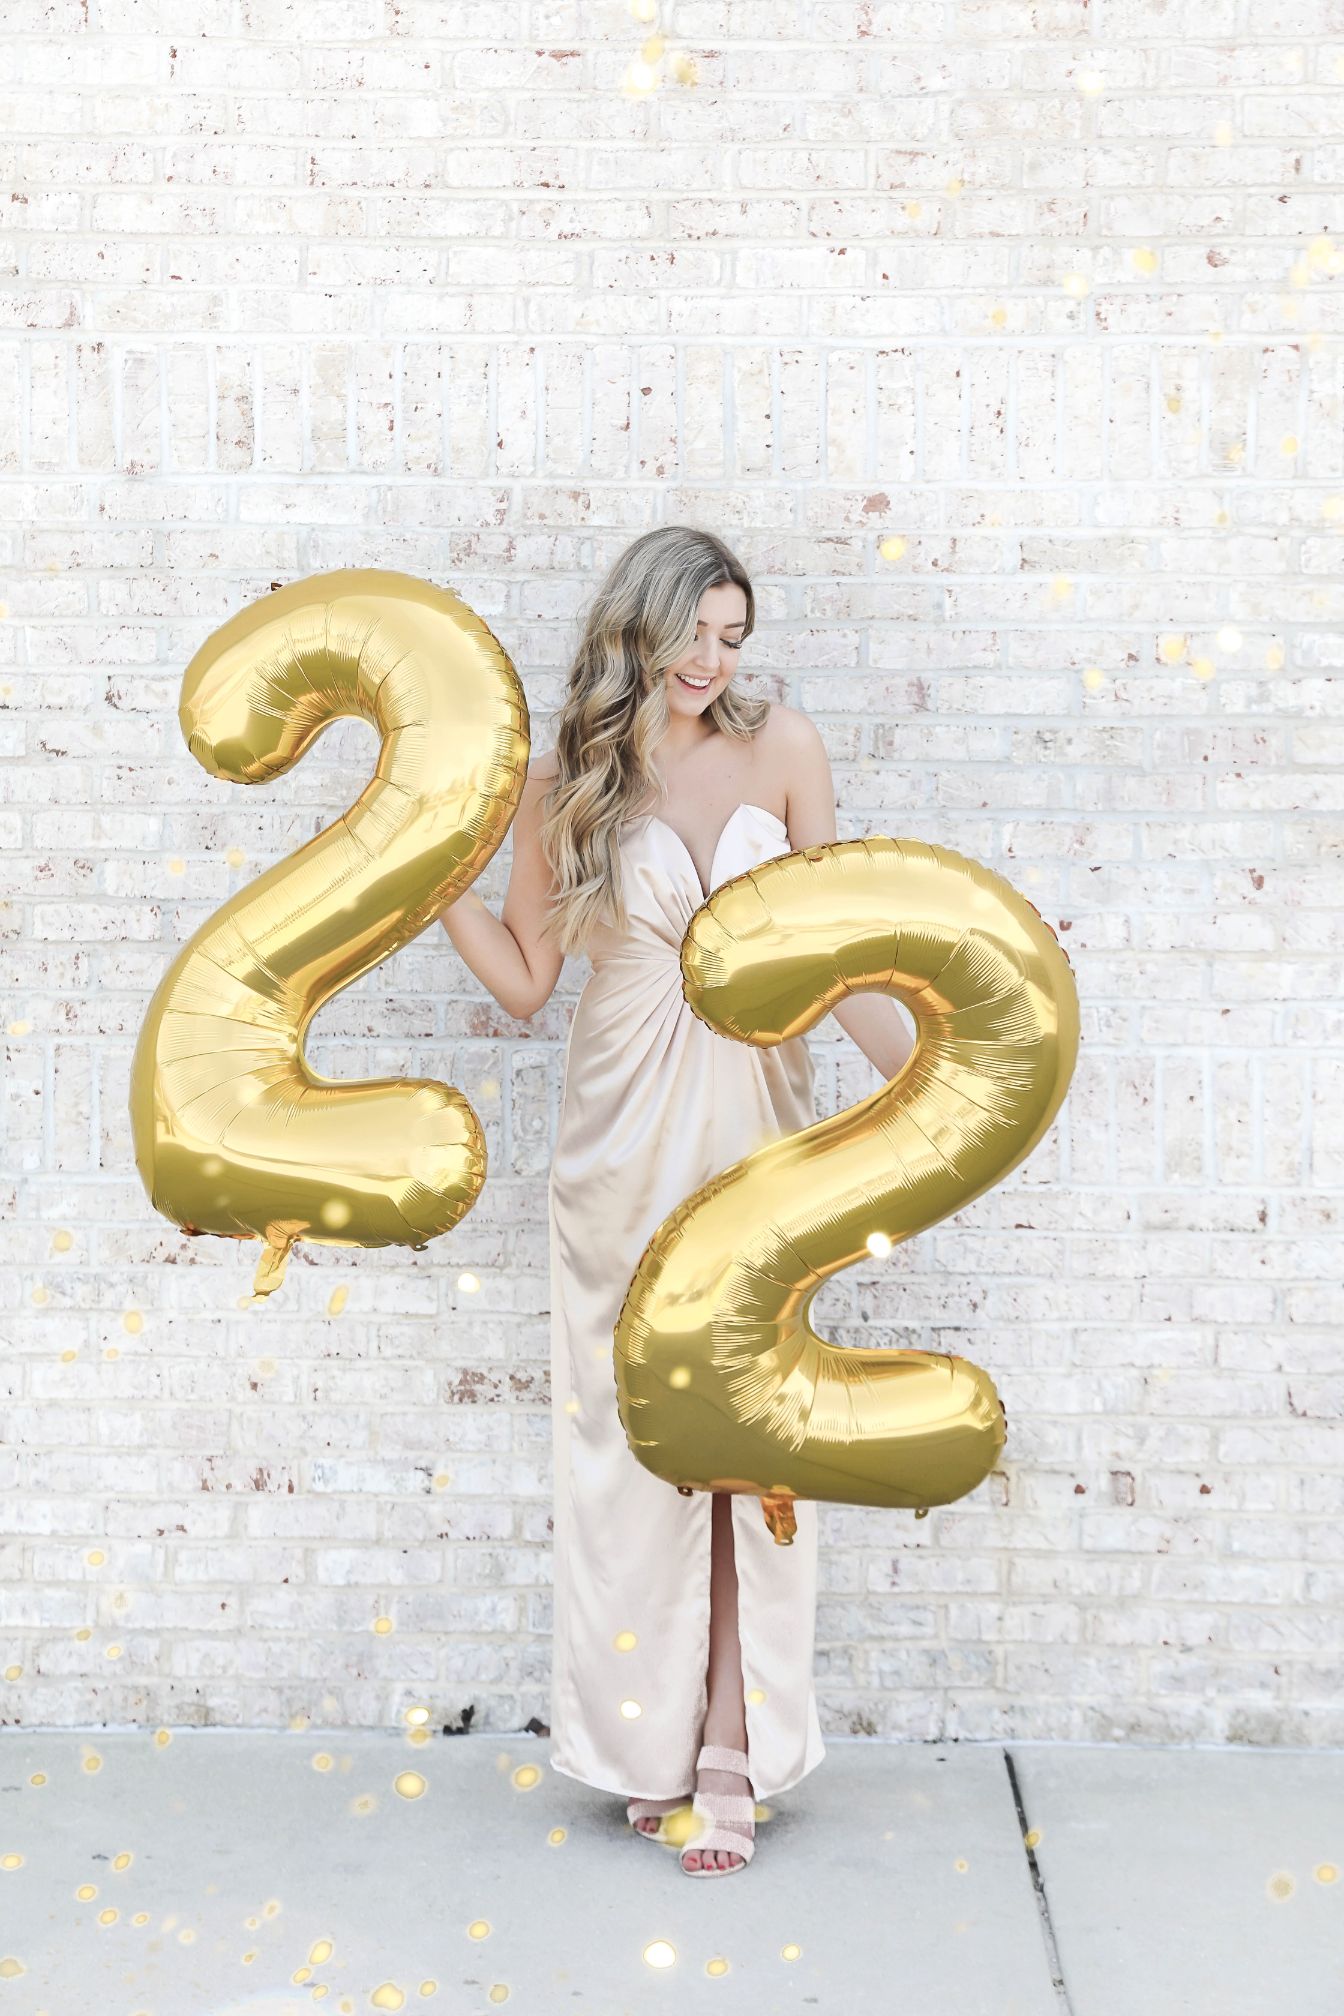 22nd birthday! I'm feeling twenty two! The cutest birthday balloons photoshoot with glitter confetti! I also love this gold dress! Details on fashion blog daily dose of charm by lauren lindmark